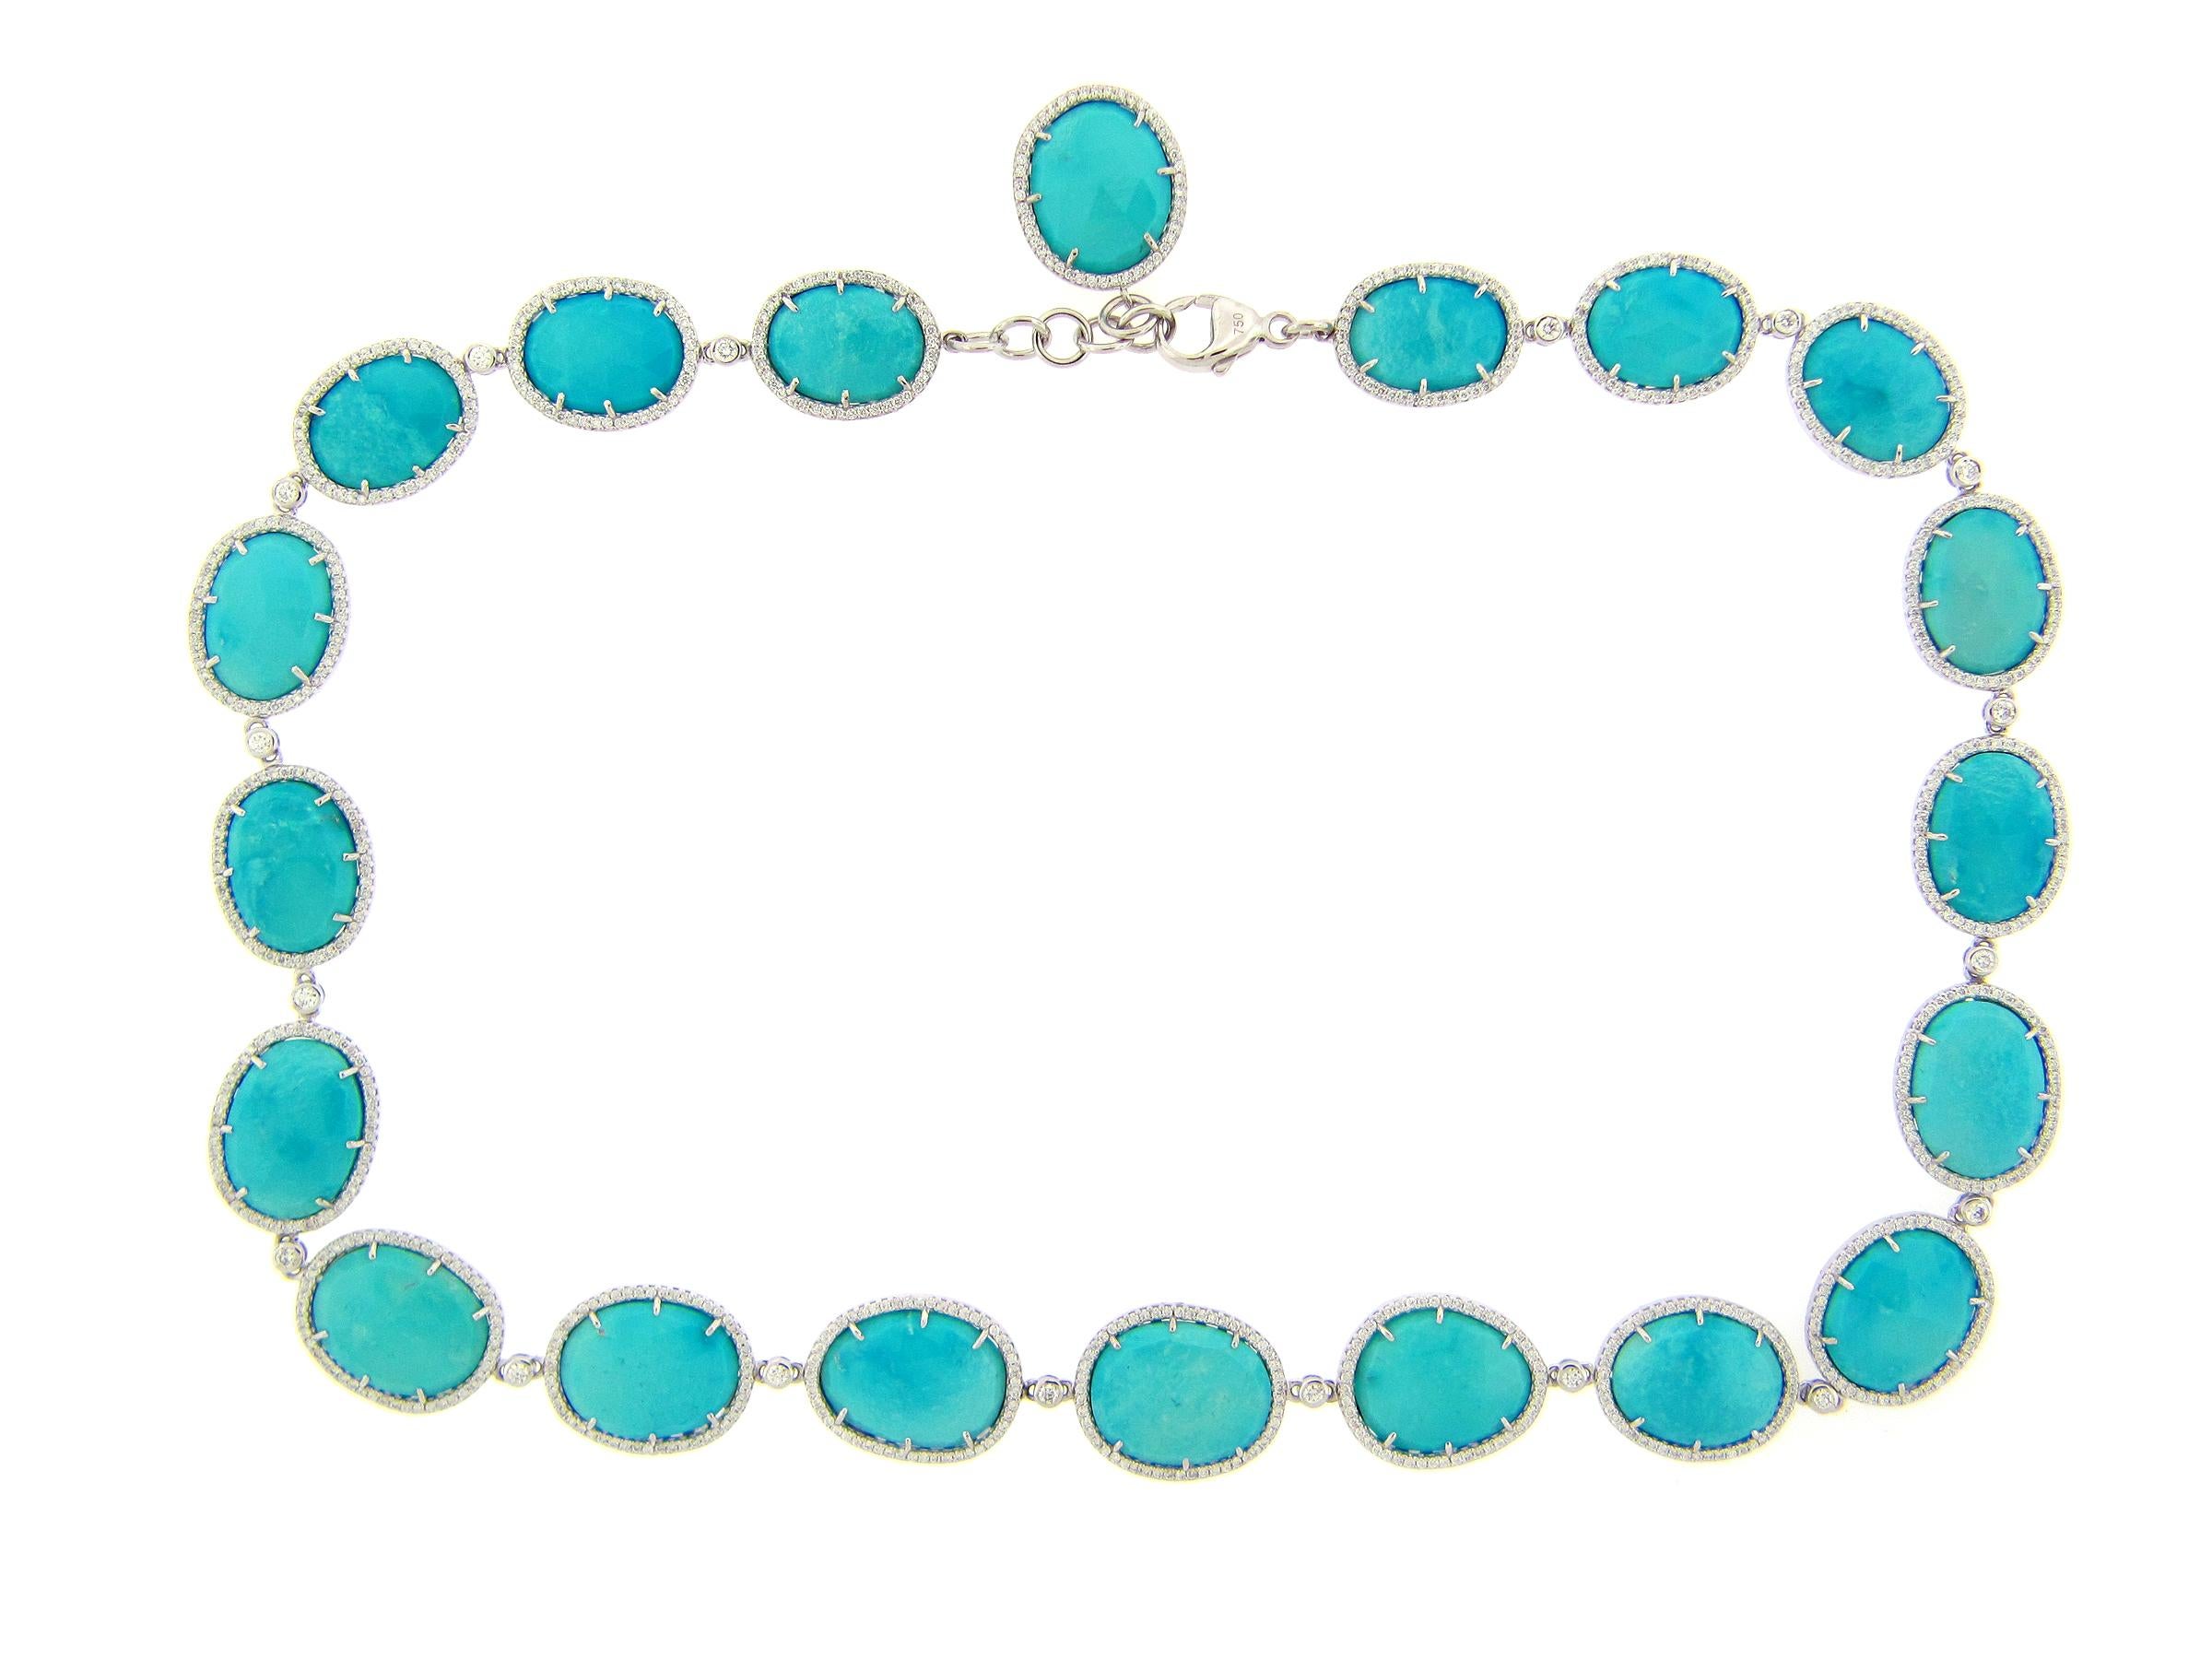 This stunning necklace features 20 Rose Cut Turquoise stones, each with their own Diamond Halo. This necklace is set in 18k White Gold. This necklace is secured by a large lobster chain and measures at 16.5